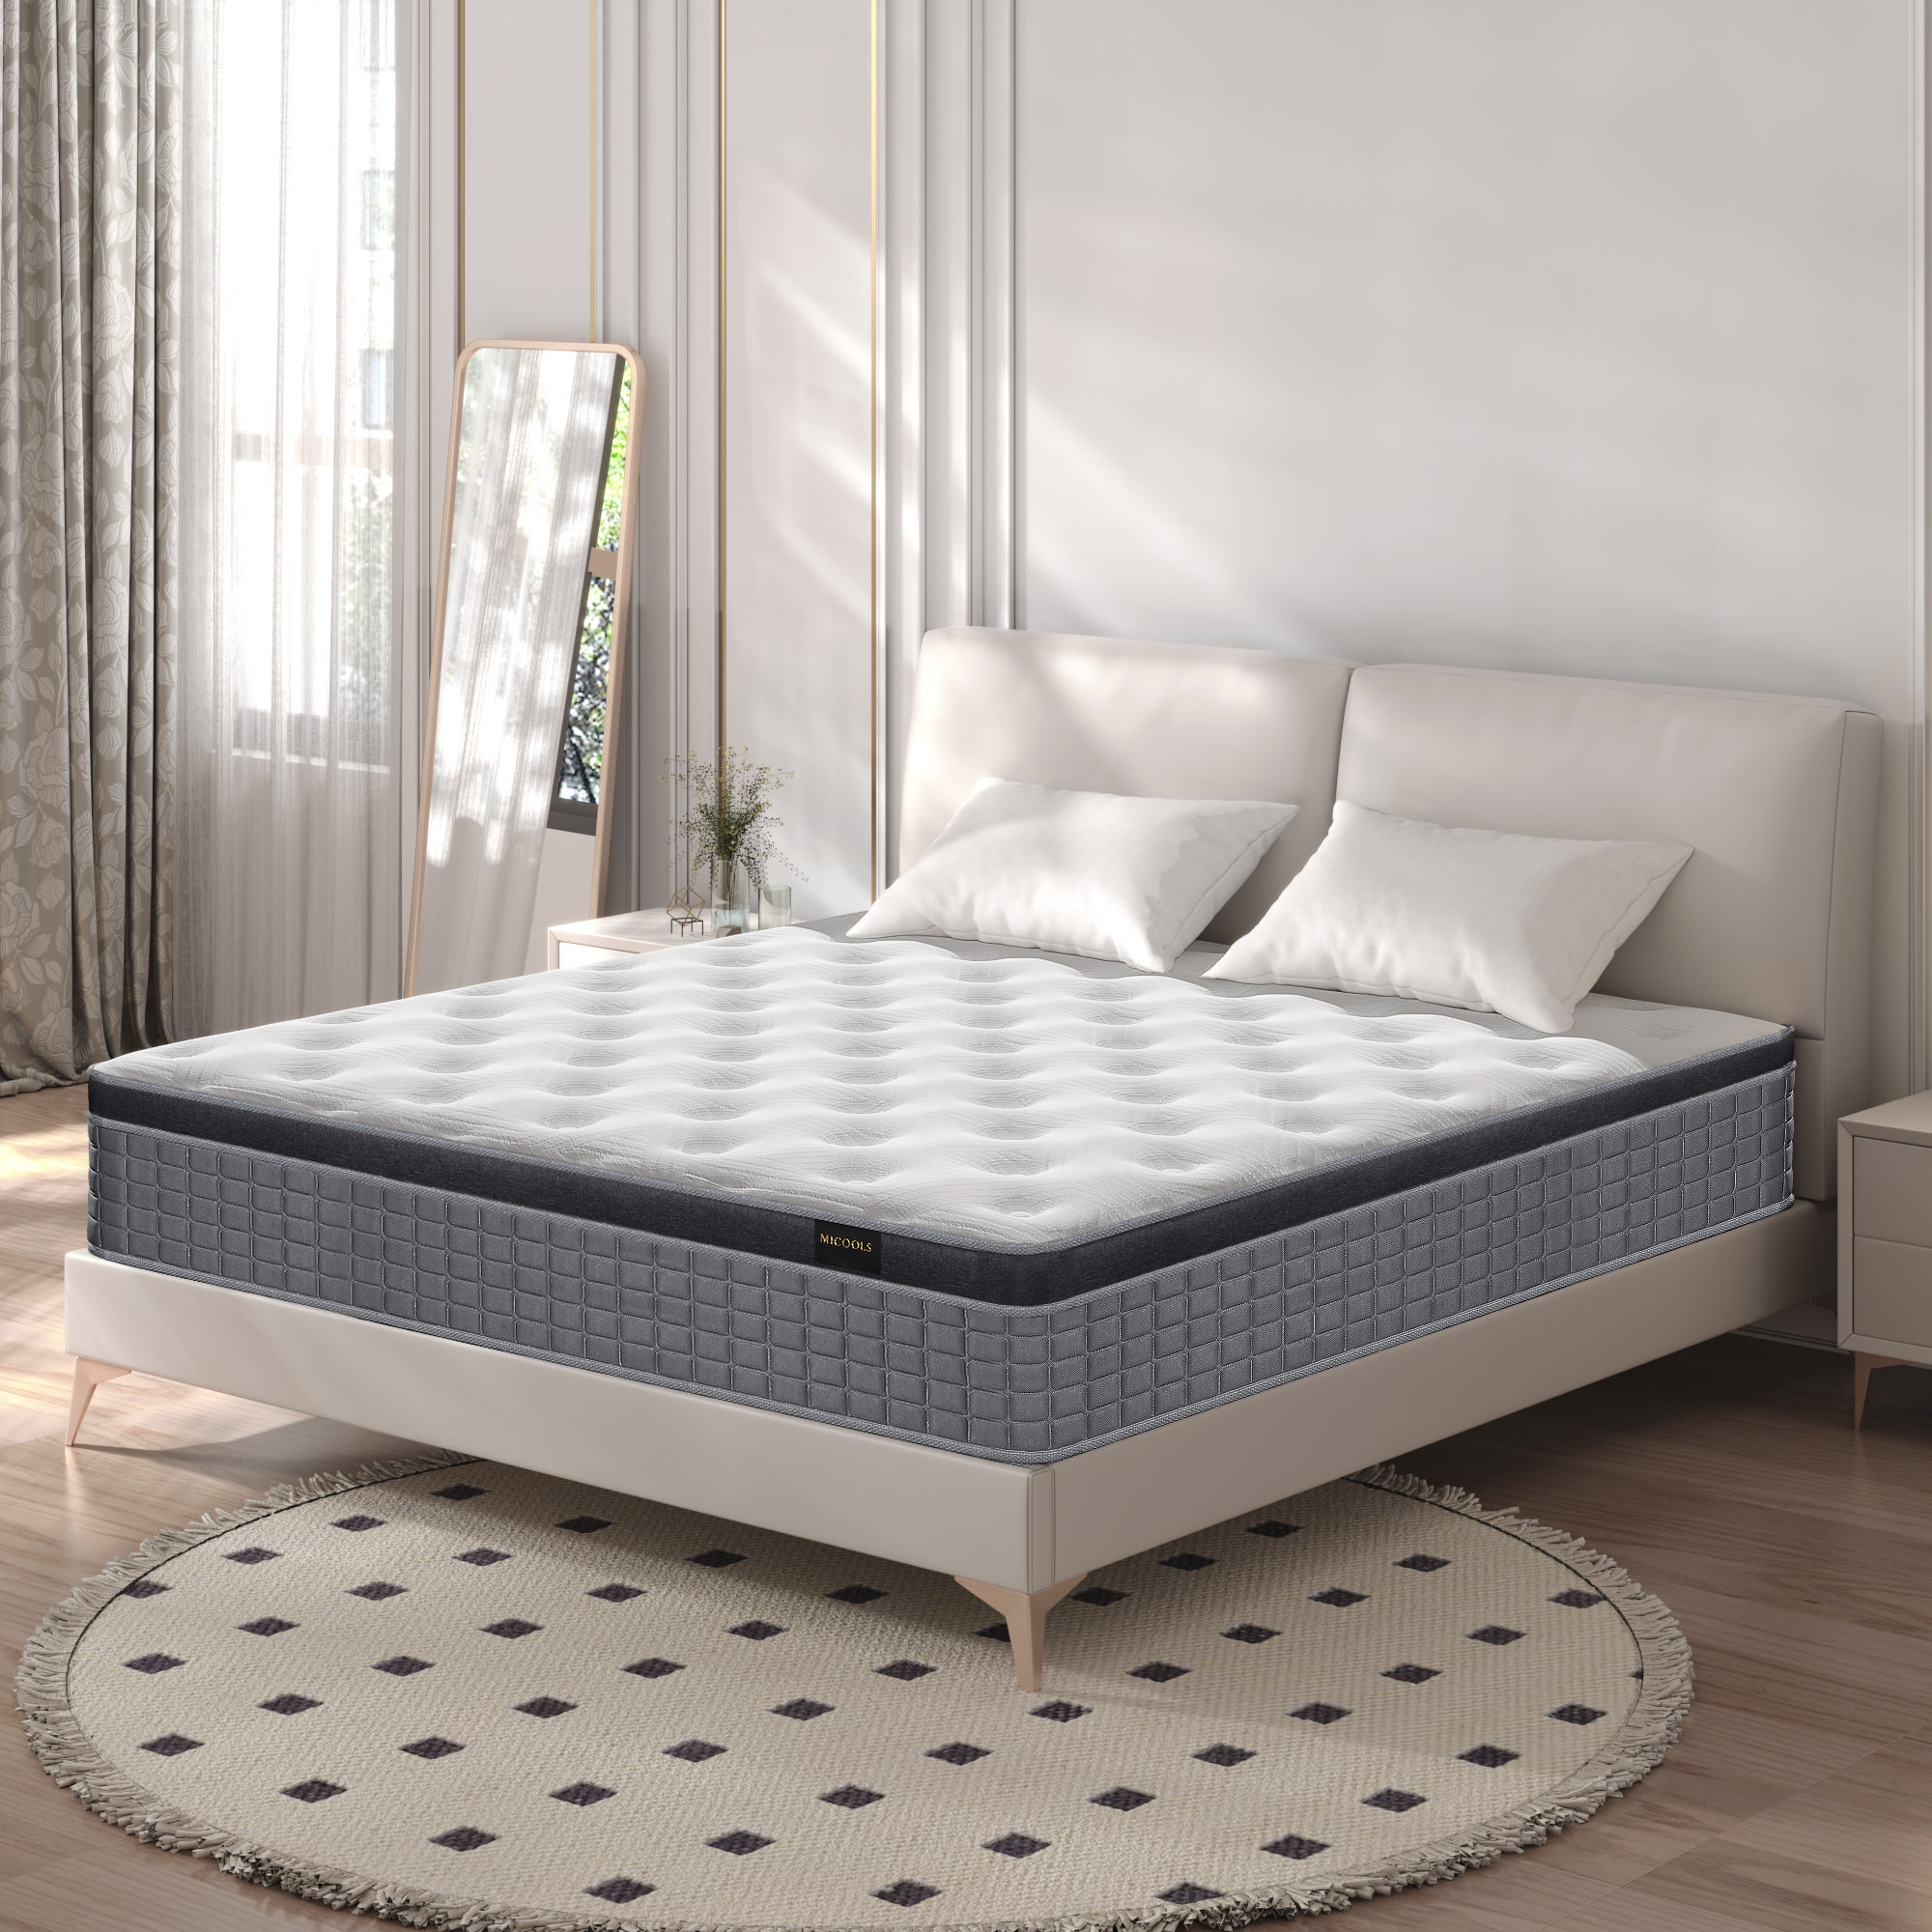 Housse protection matelas stockage - Cdiscount